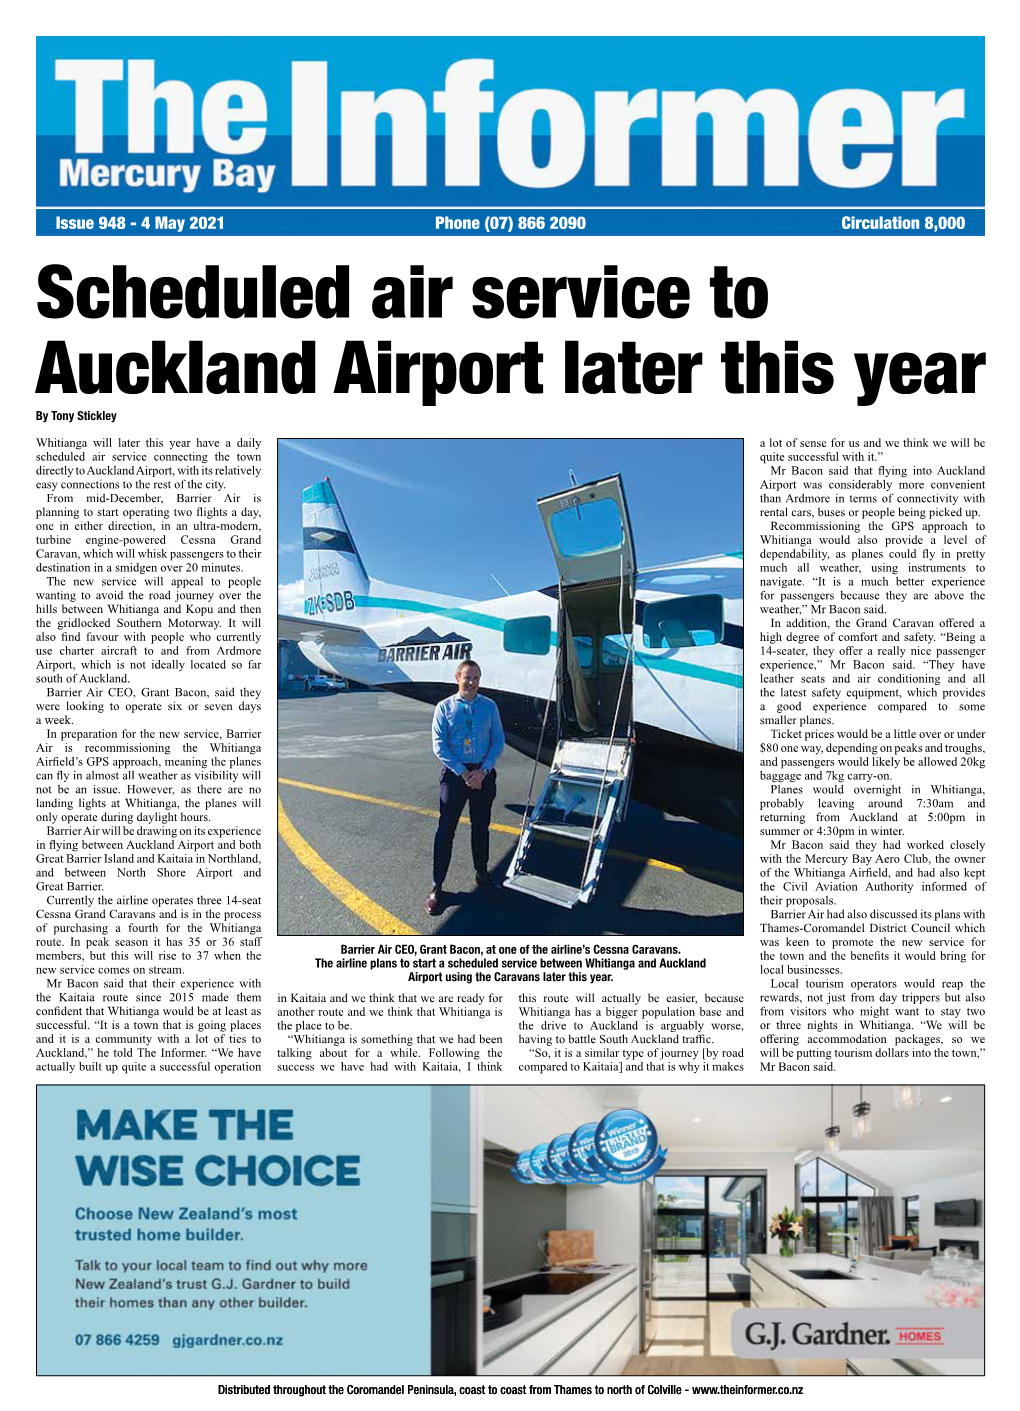 Scheduled Air Service to Auckland Airport Later This Year by Tony Stickley